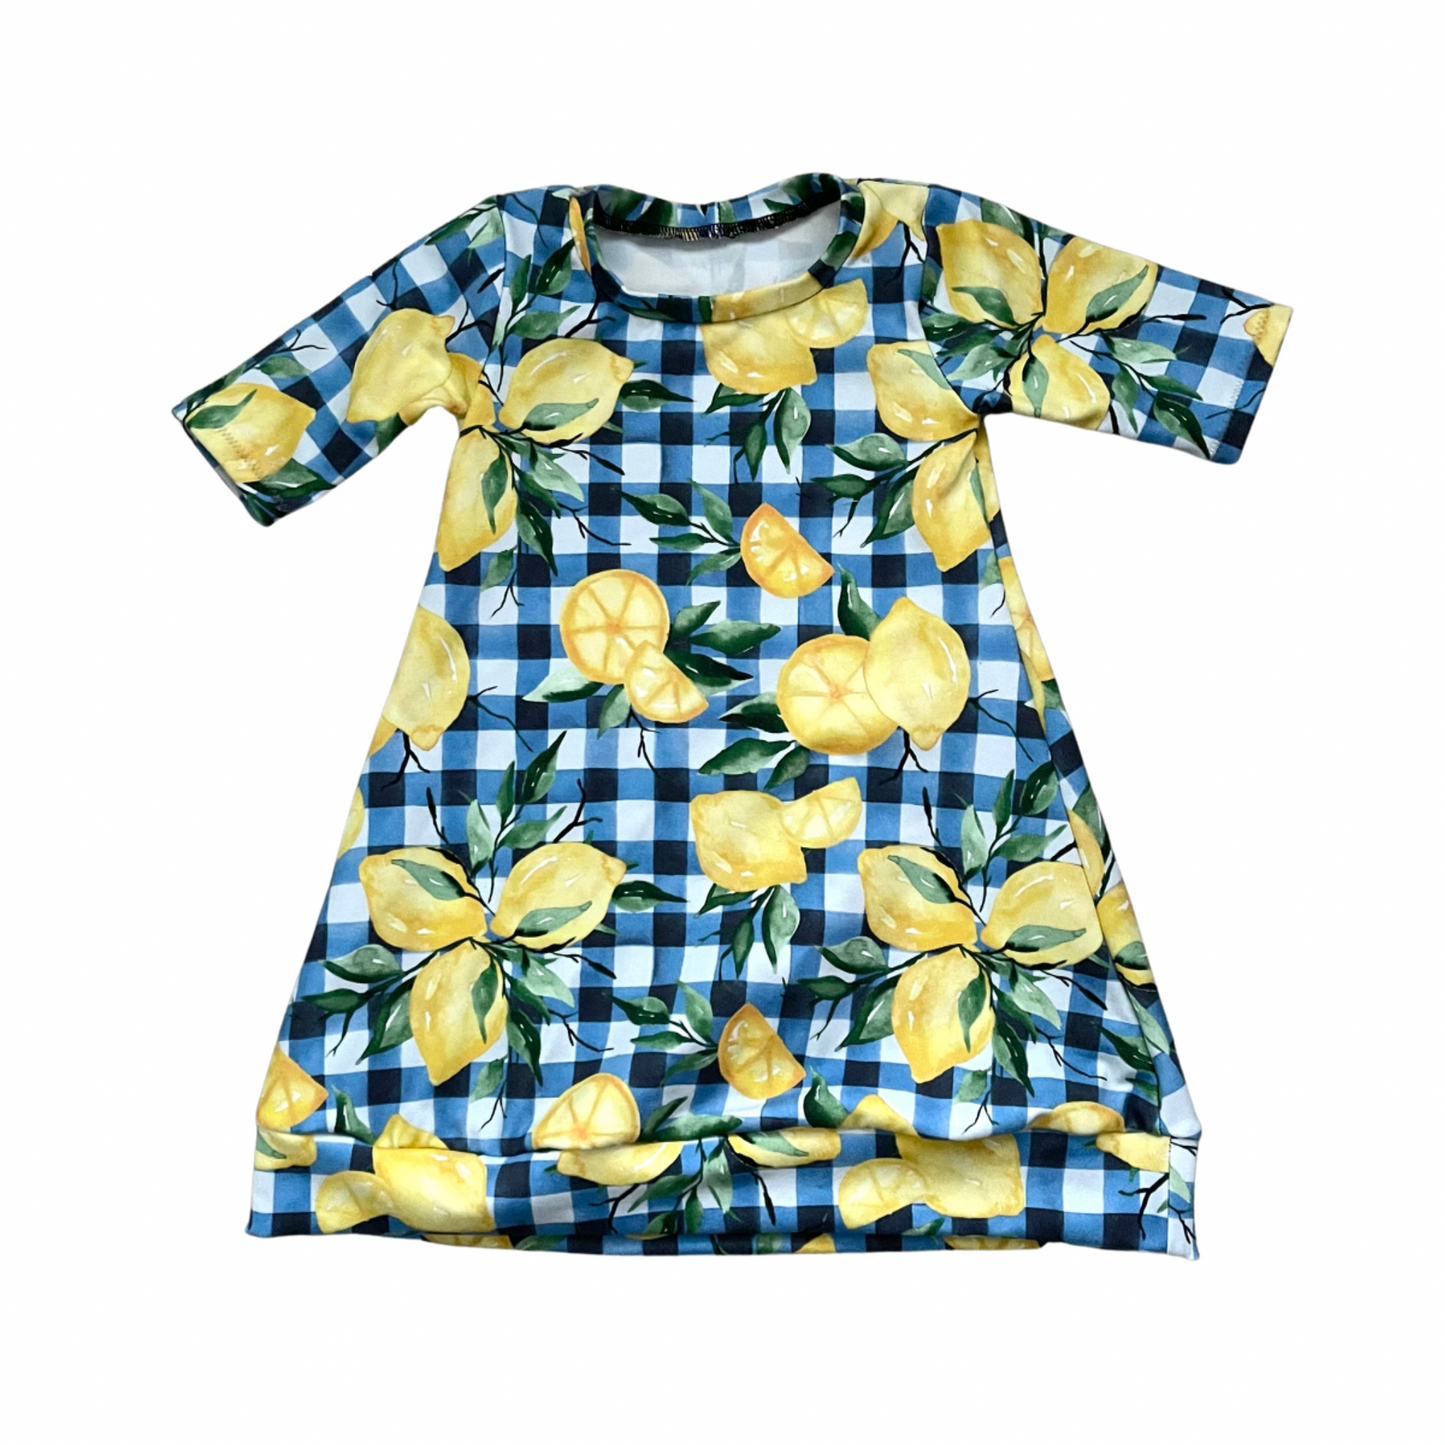 When life gives you lemons - swing dress 3/4 sleeves - 18m